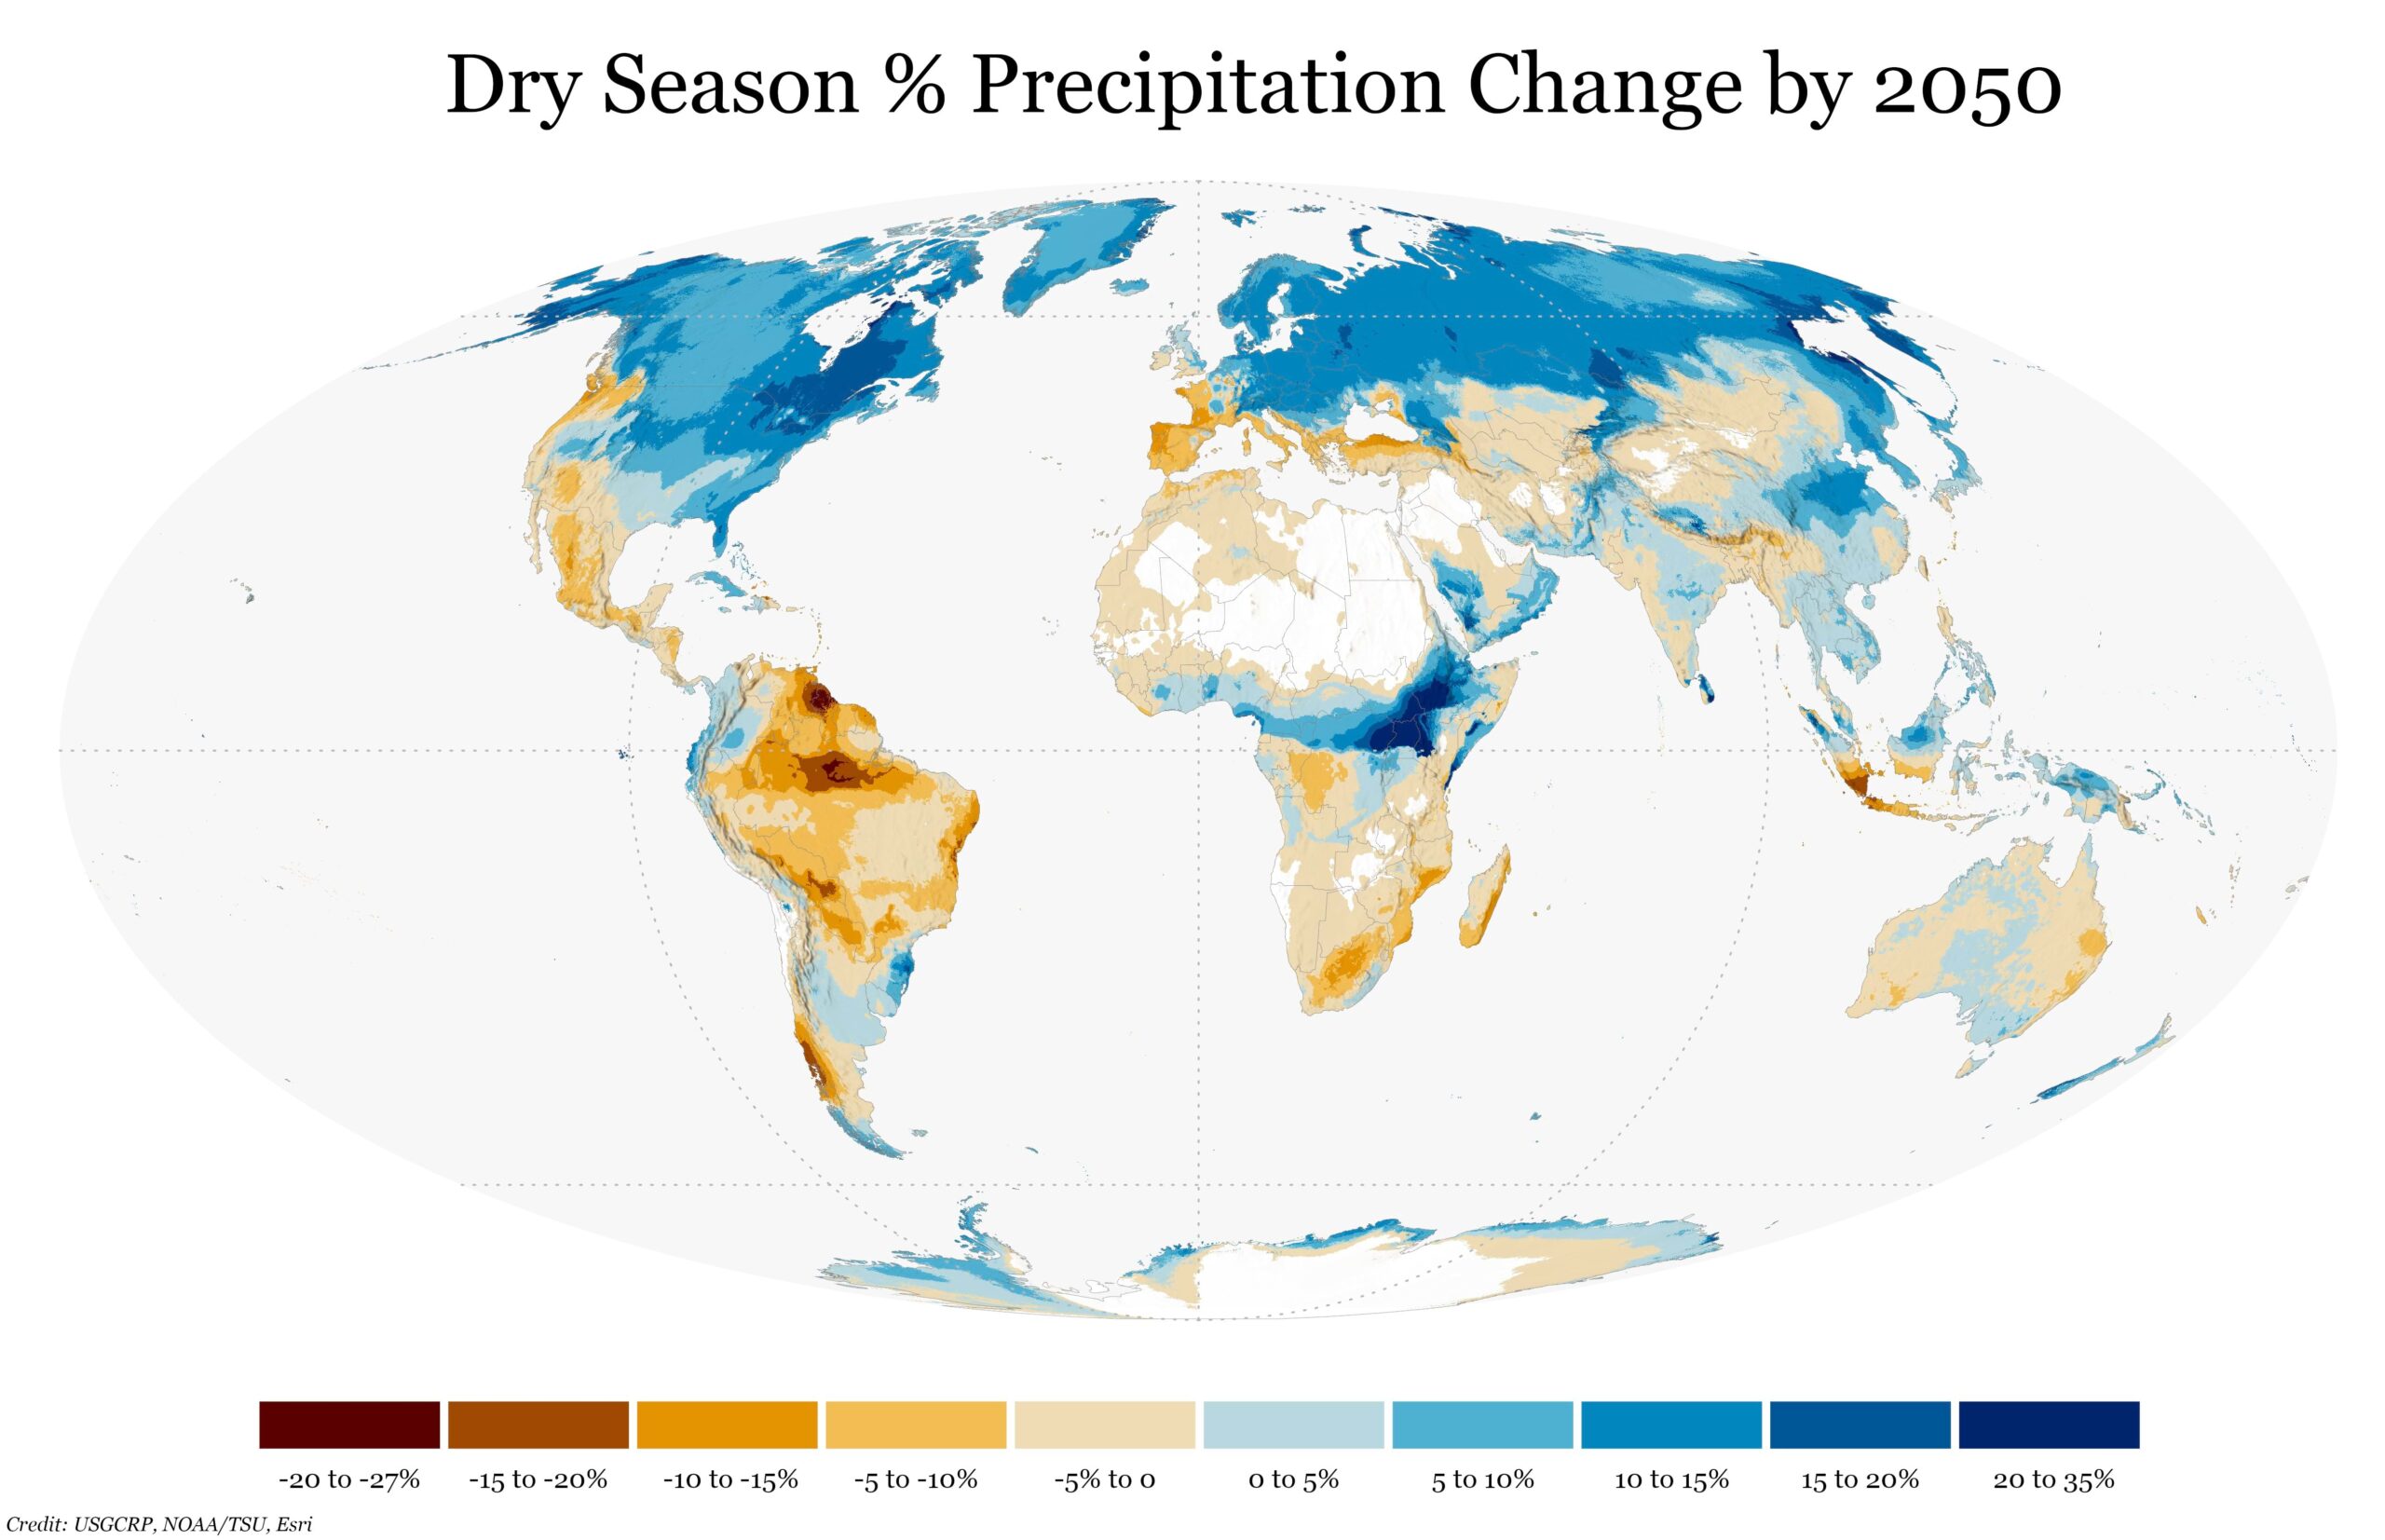 Even during the dry season, may parts of the world, especially the Northern Hemisphere, could experience increases in precipitation.